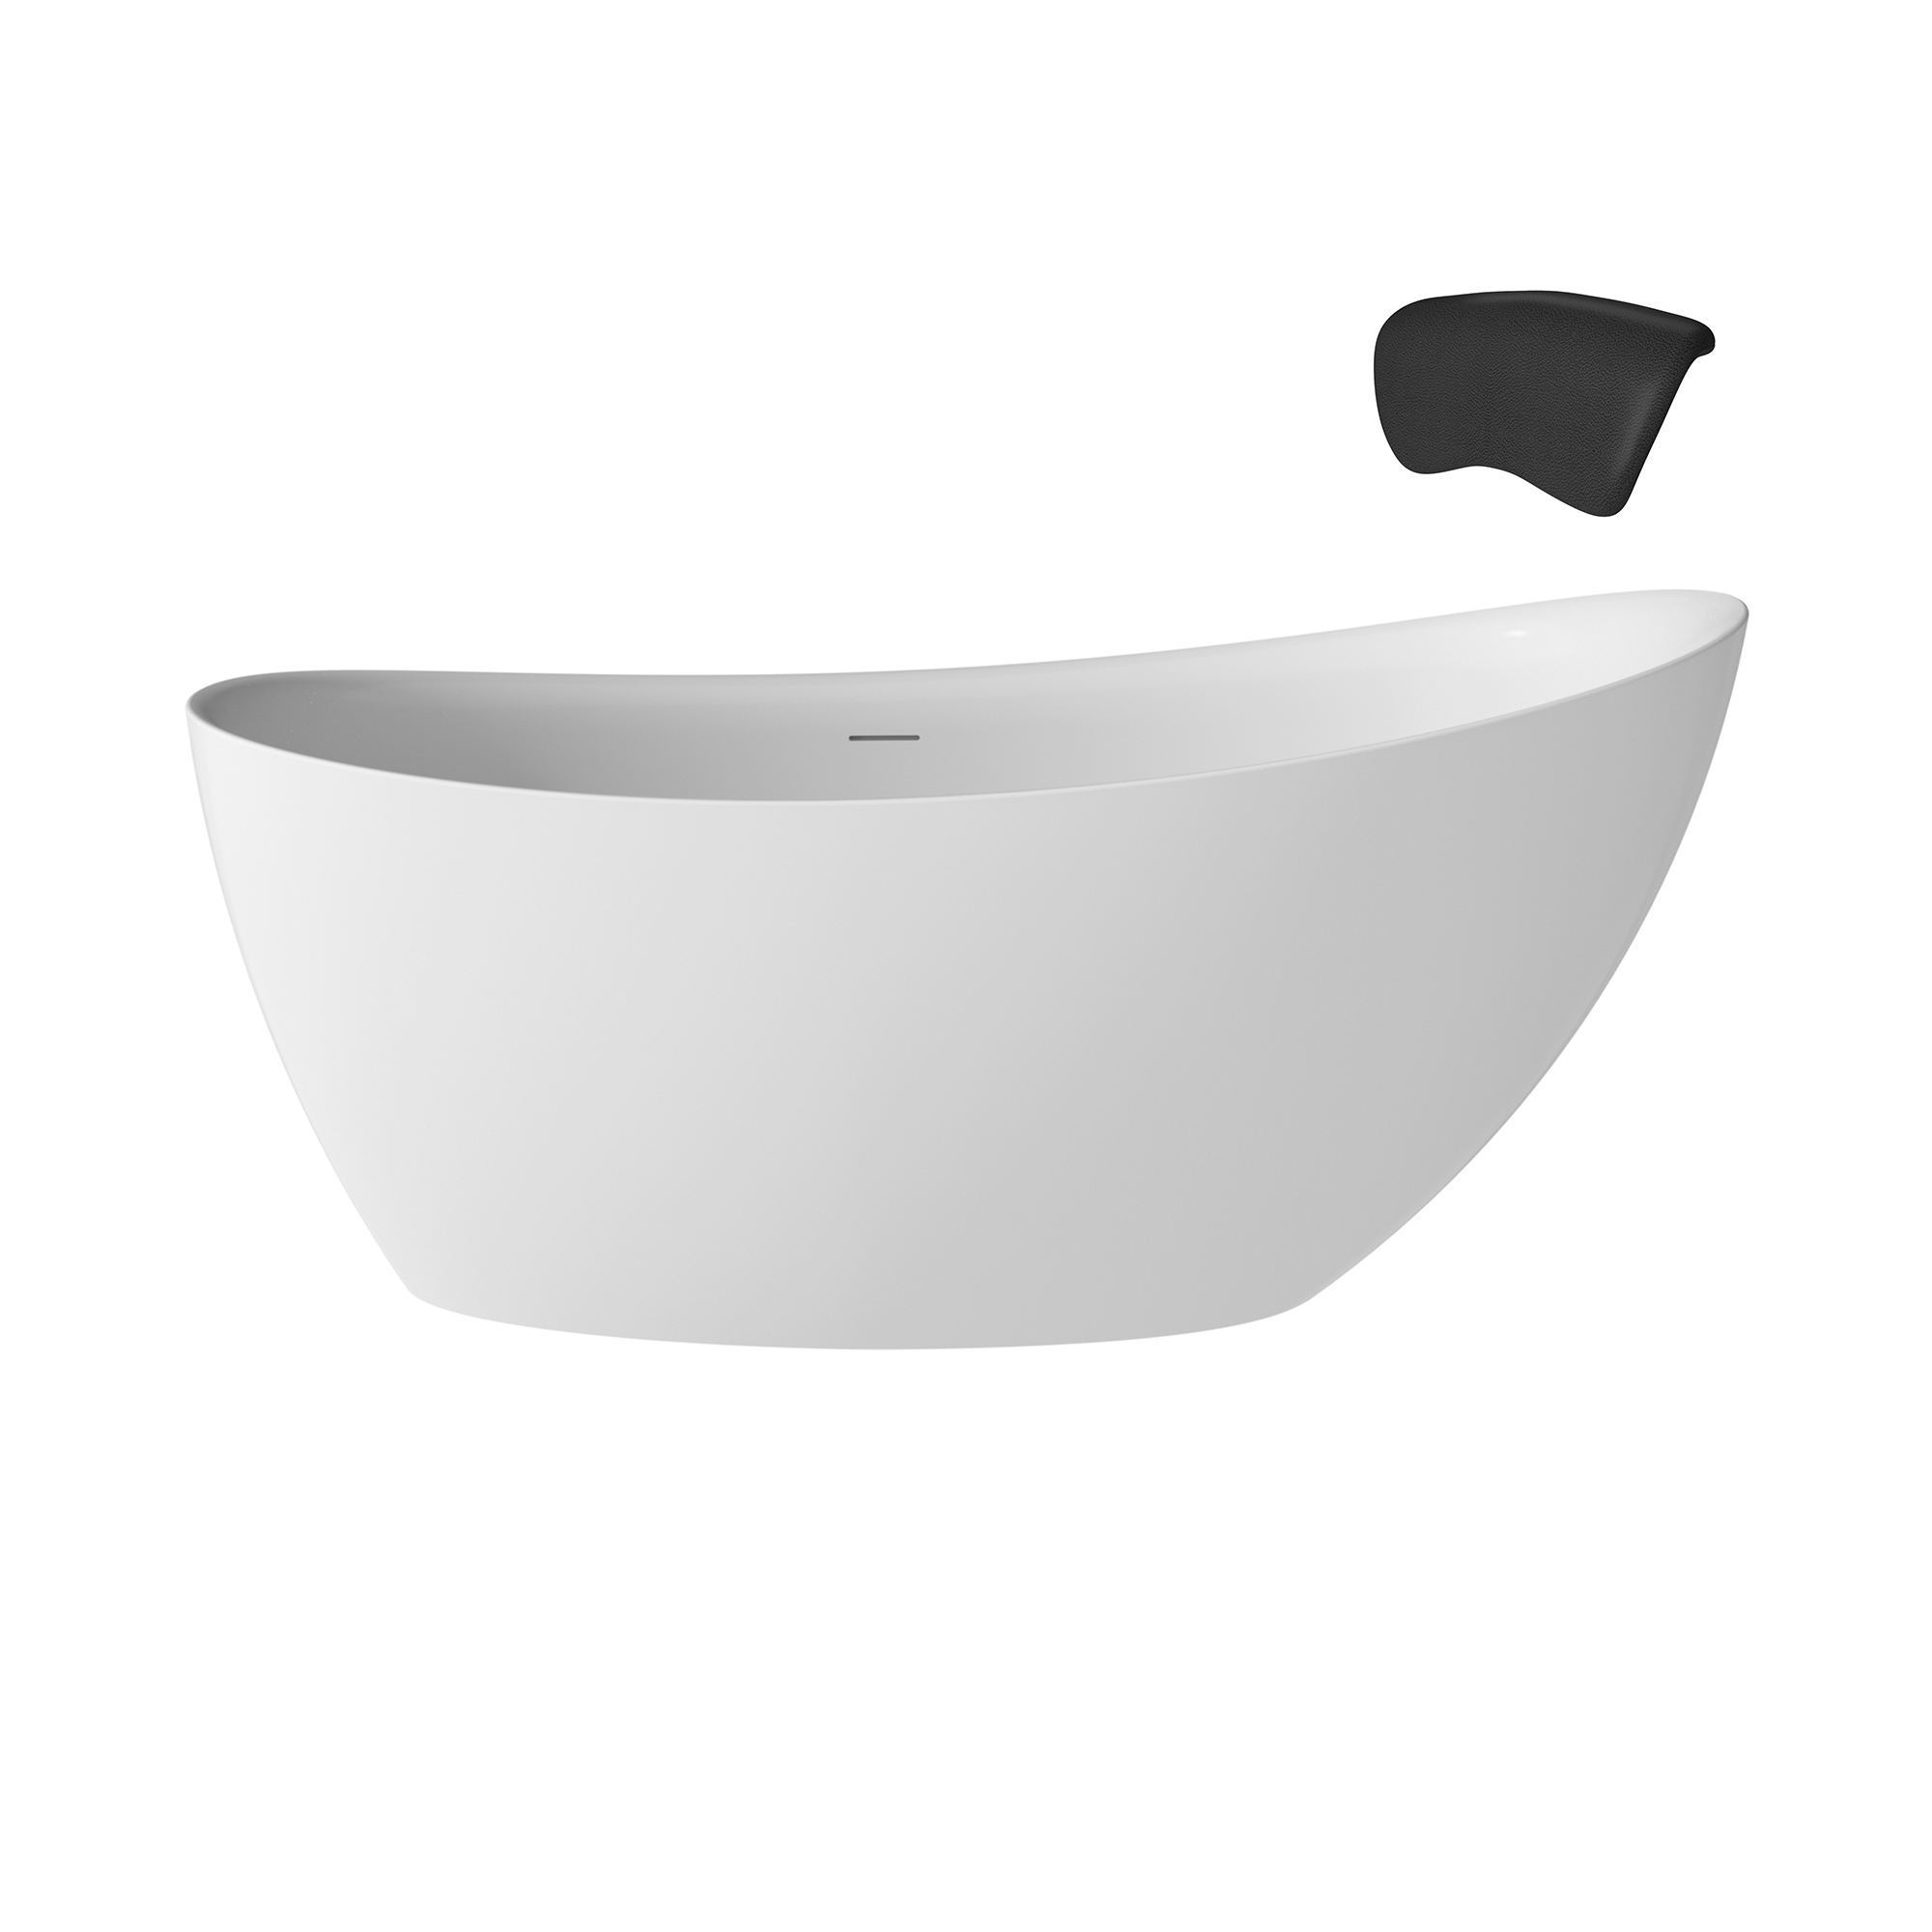 59/67" Matte White Stone Resin Bathtubs, Adult Freestanding Soaking Tub with Cushions, Manufactured with a Unique Solid Stone